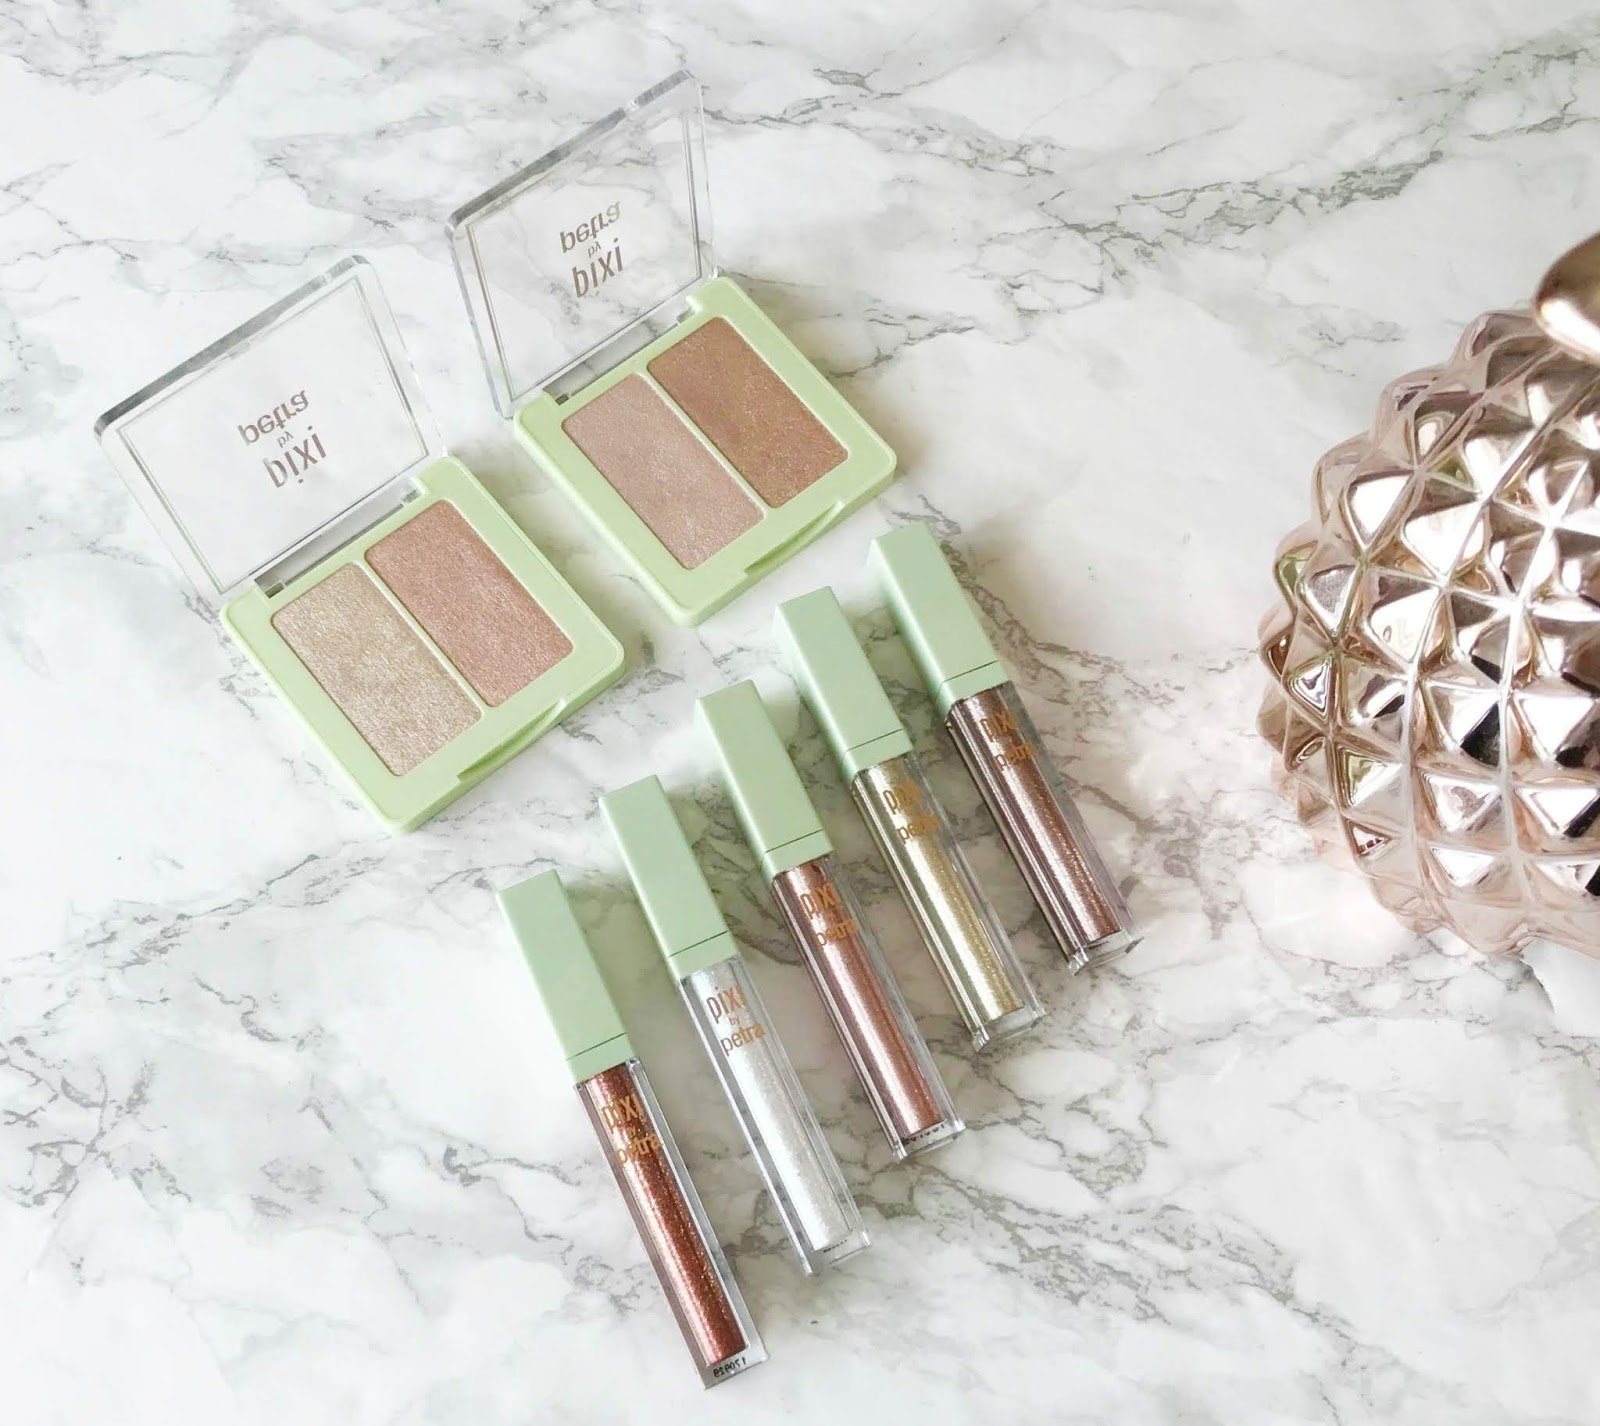 Pixi Glowy-Glossamer Duo Review & Swatches, Pixi Liquid Fairy Lights Review & Swatches